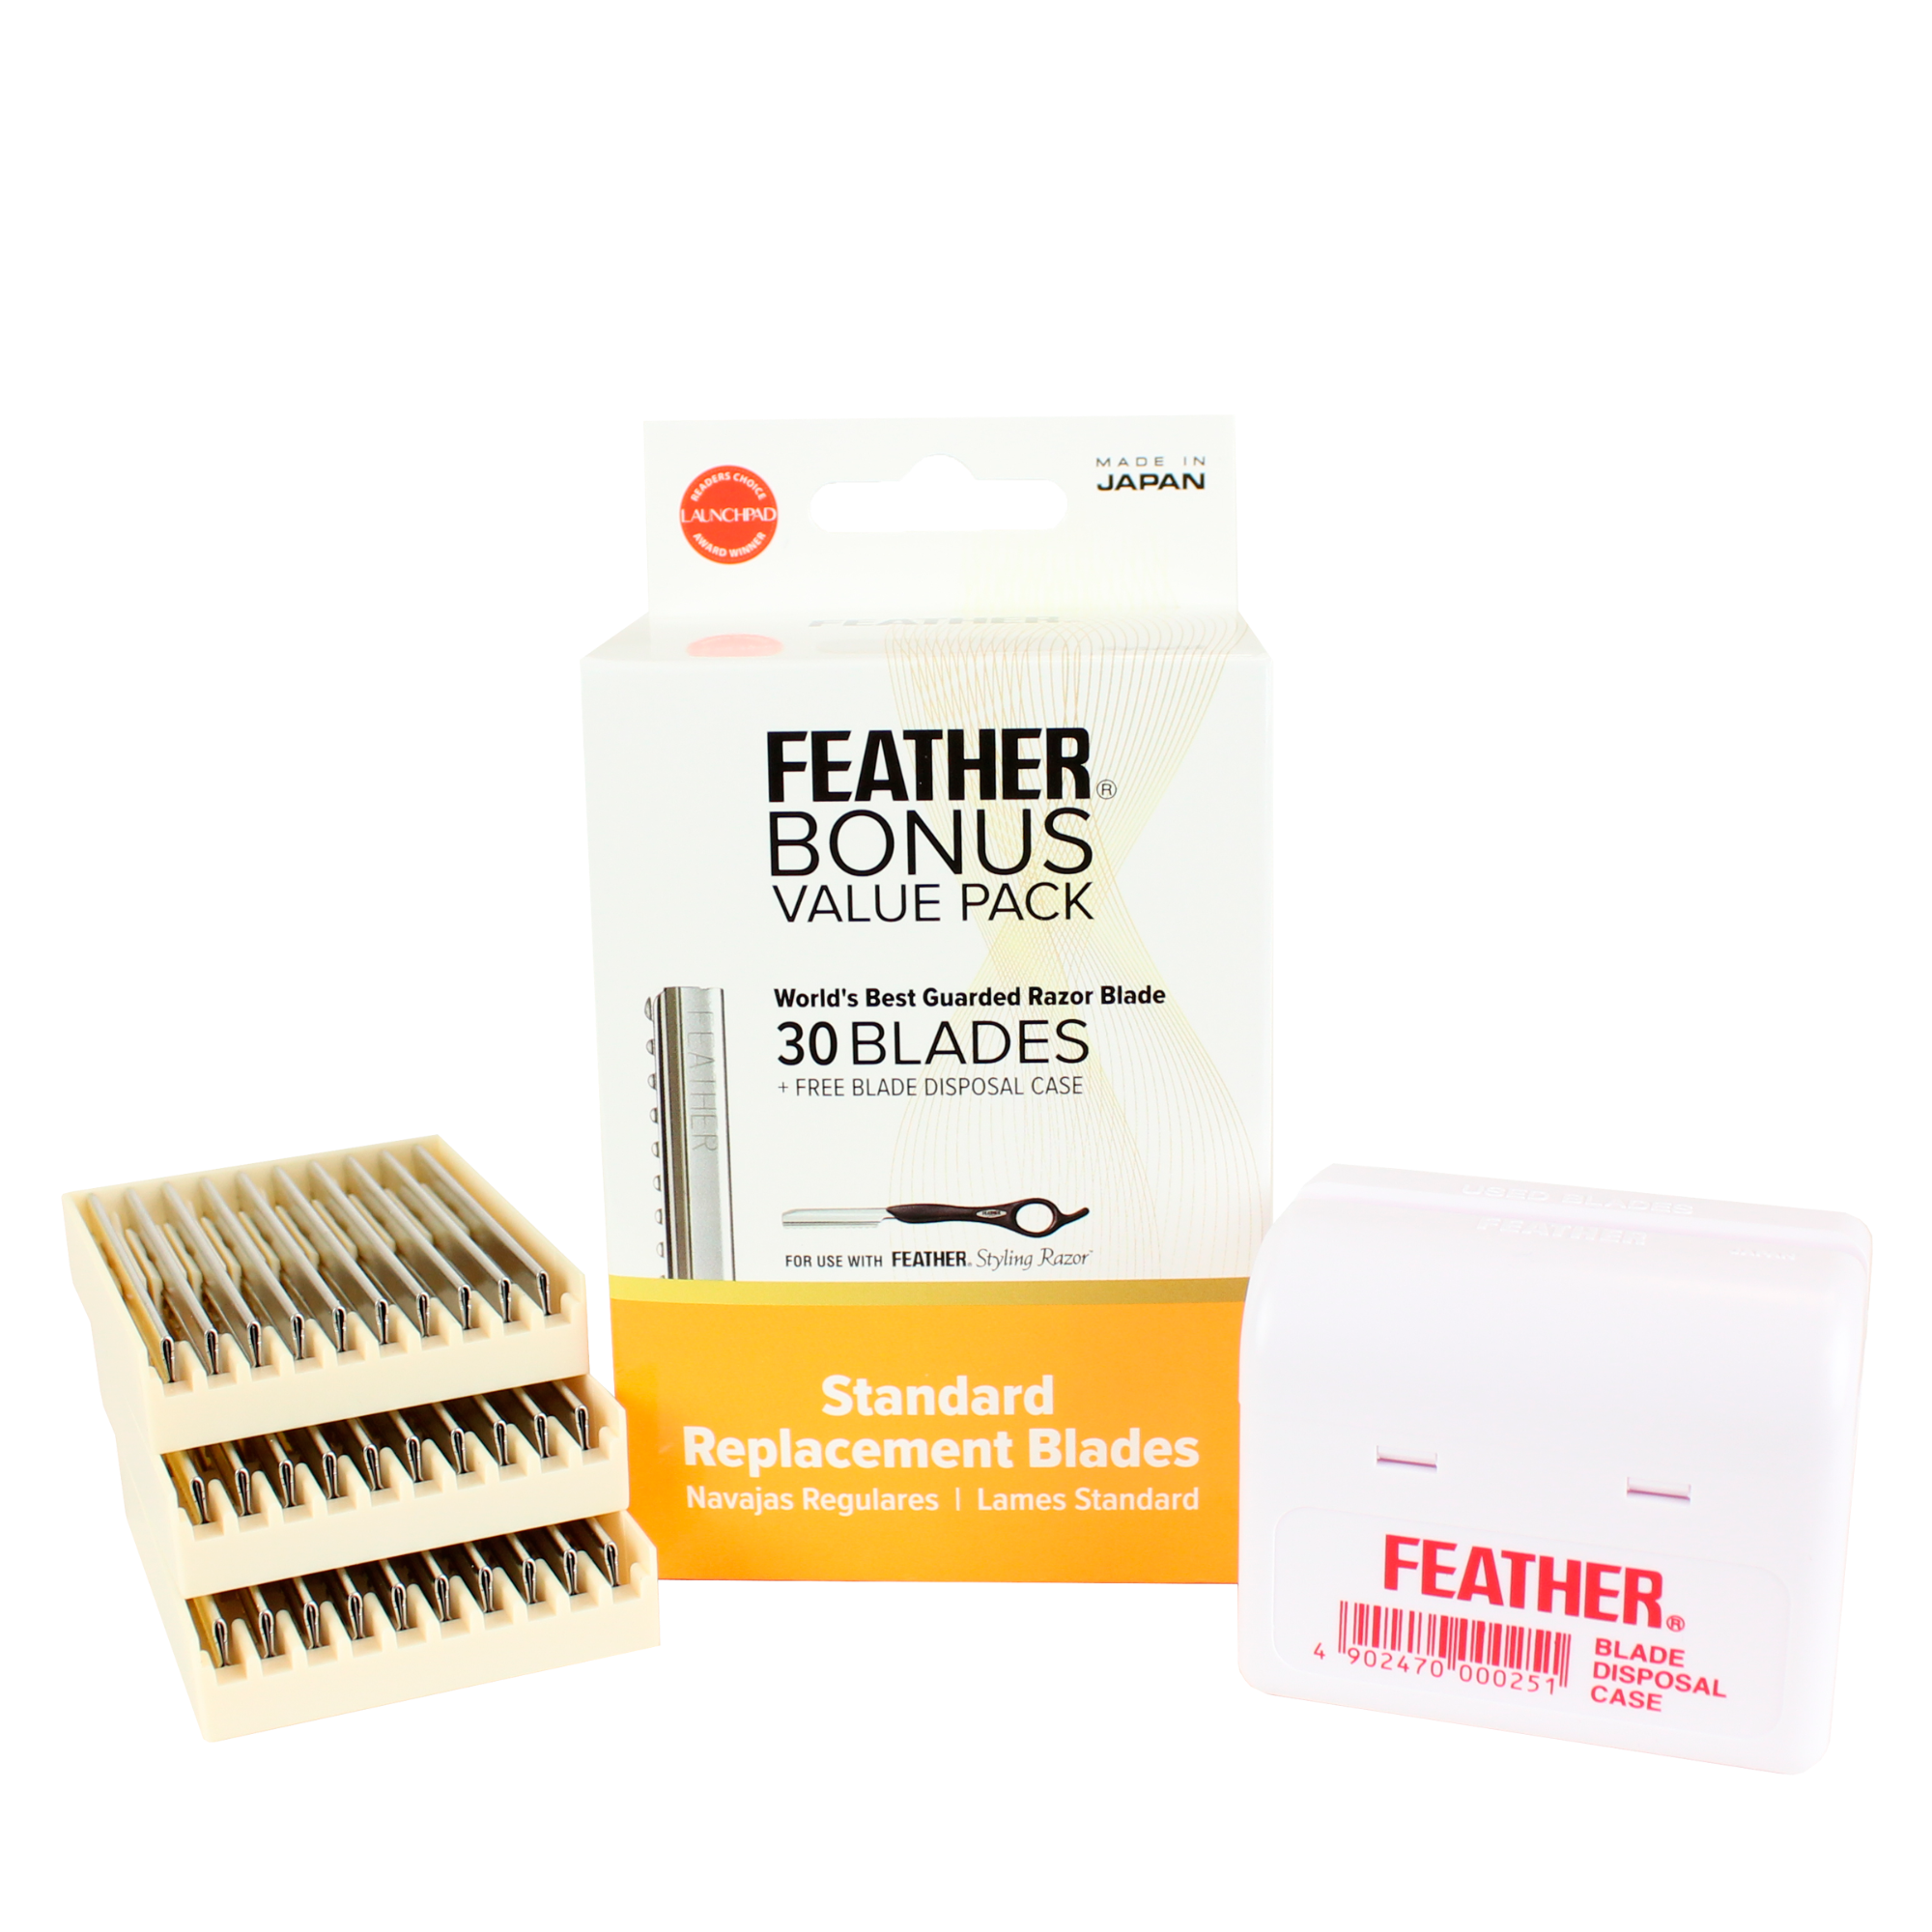 Standard Blades and Disposable Blade Case - 30 pk